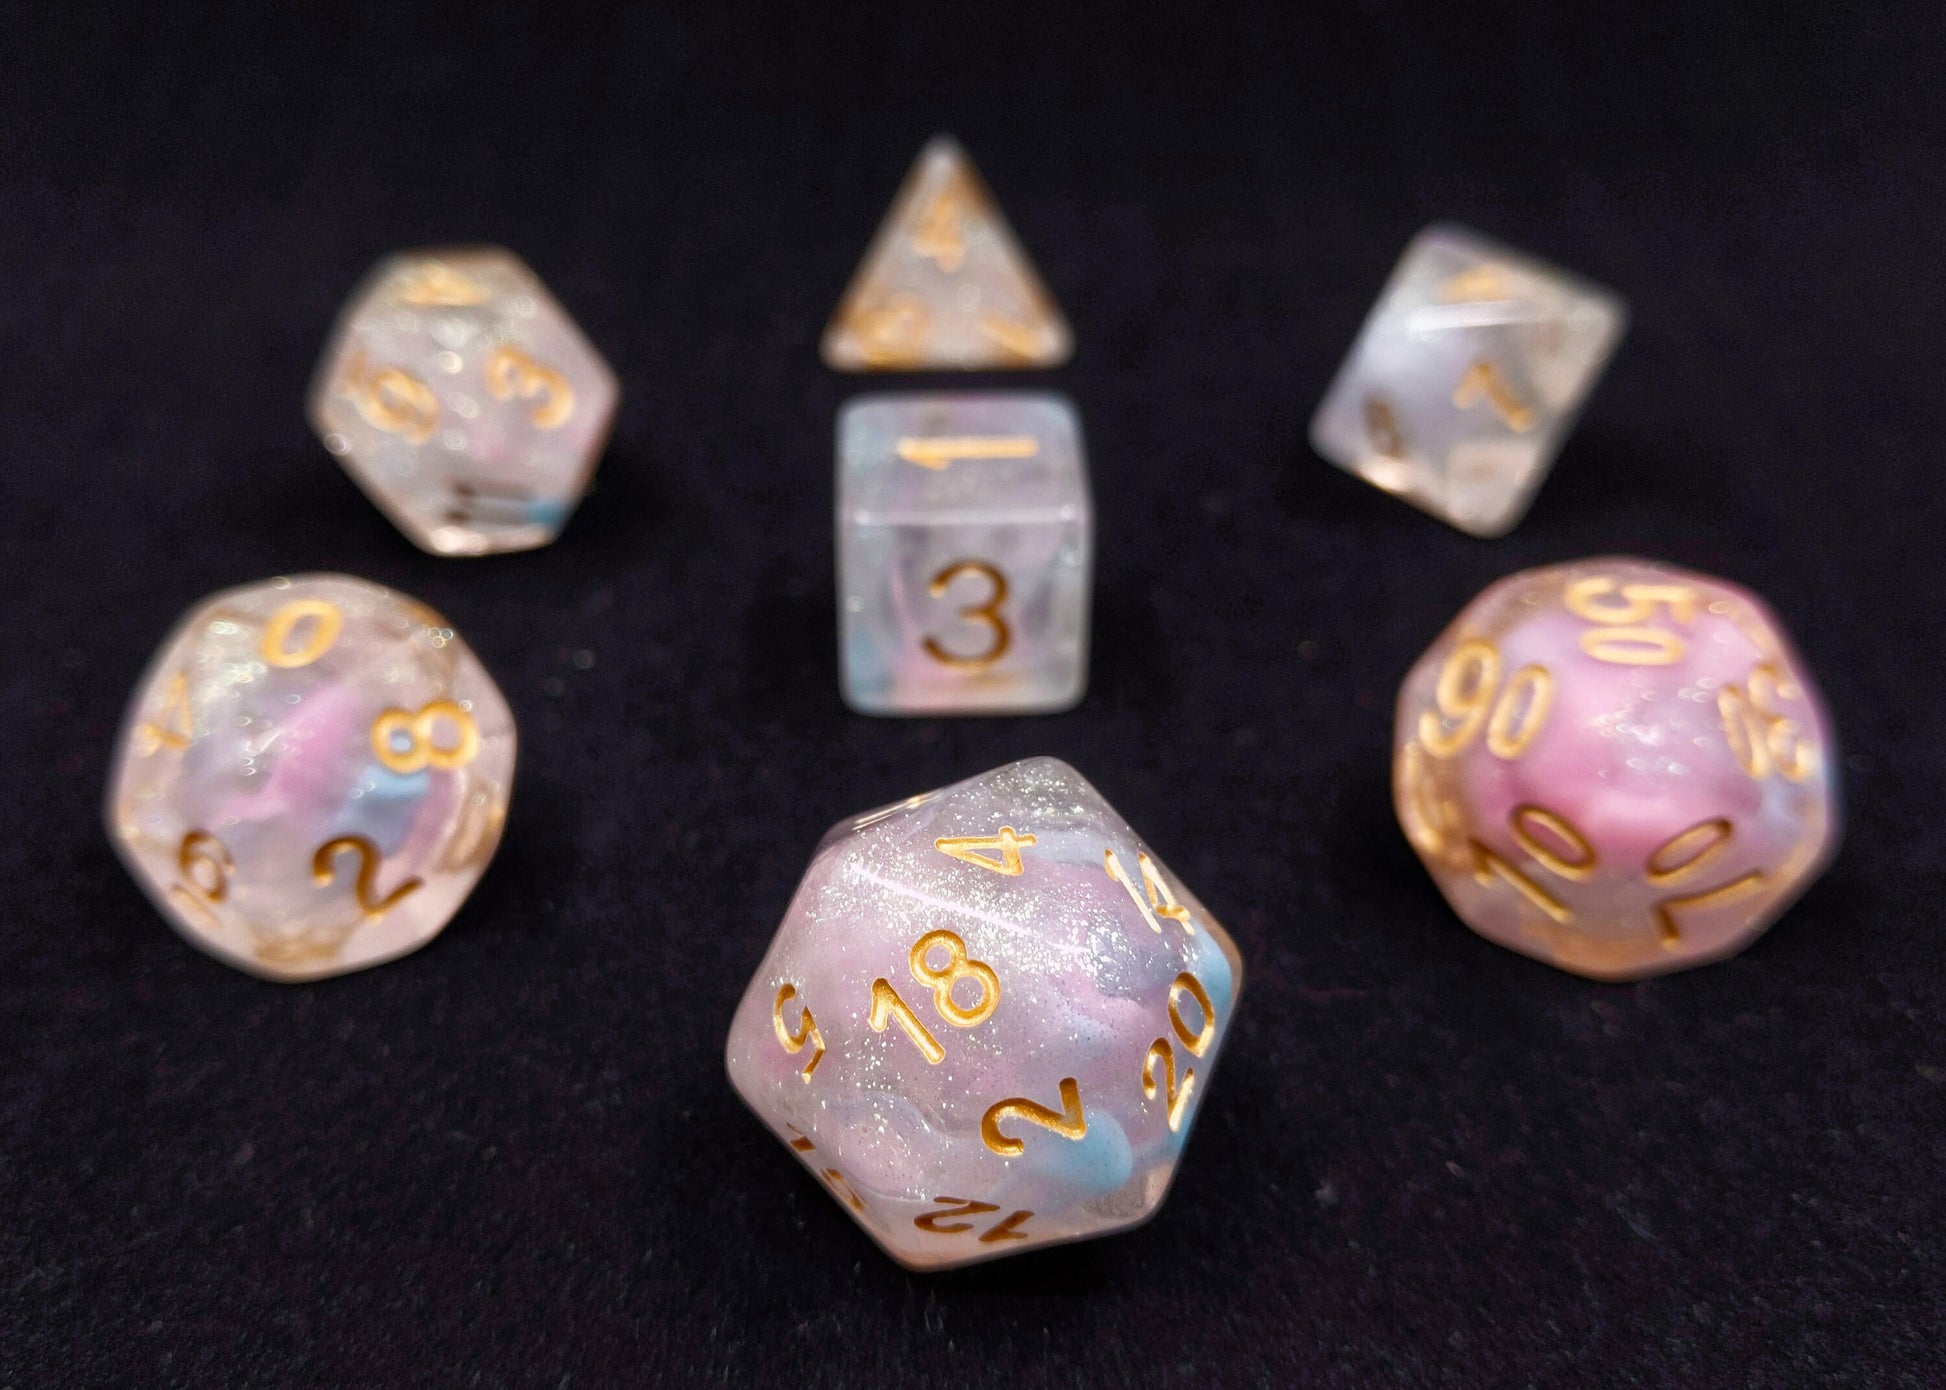 Forget Me Not Polyhedral Dice Set - Clear with Blue and Pink Swirls and micro glitter